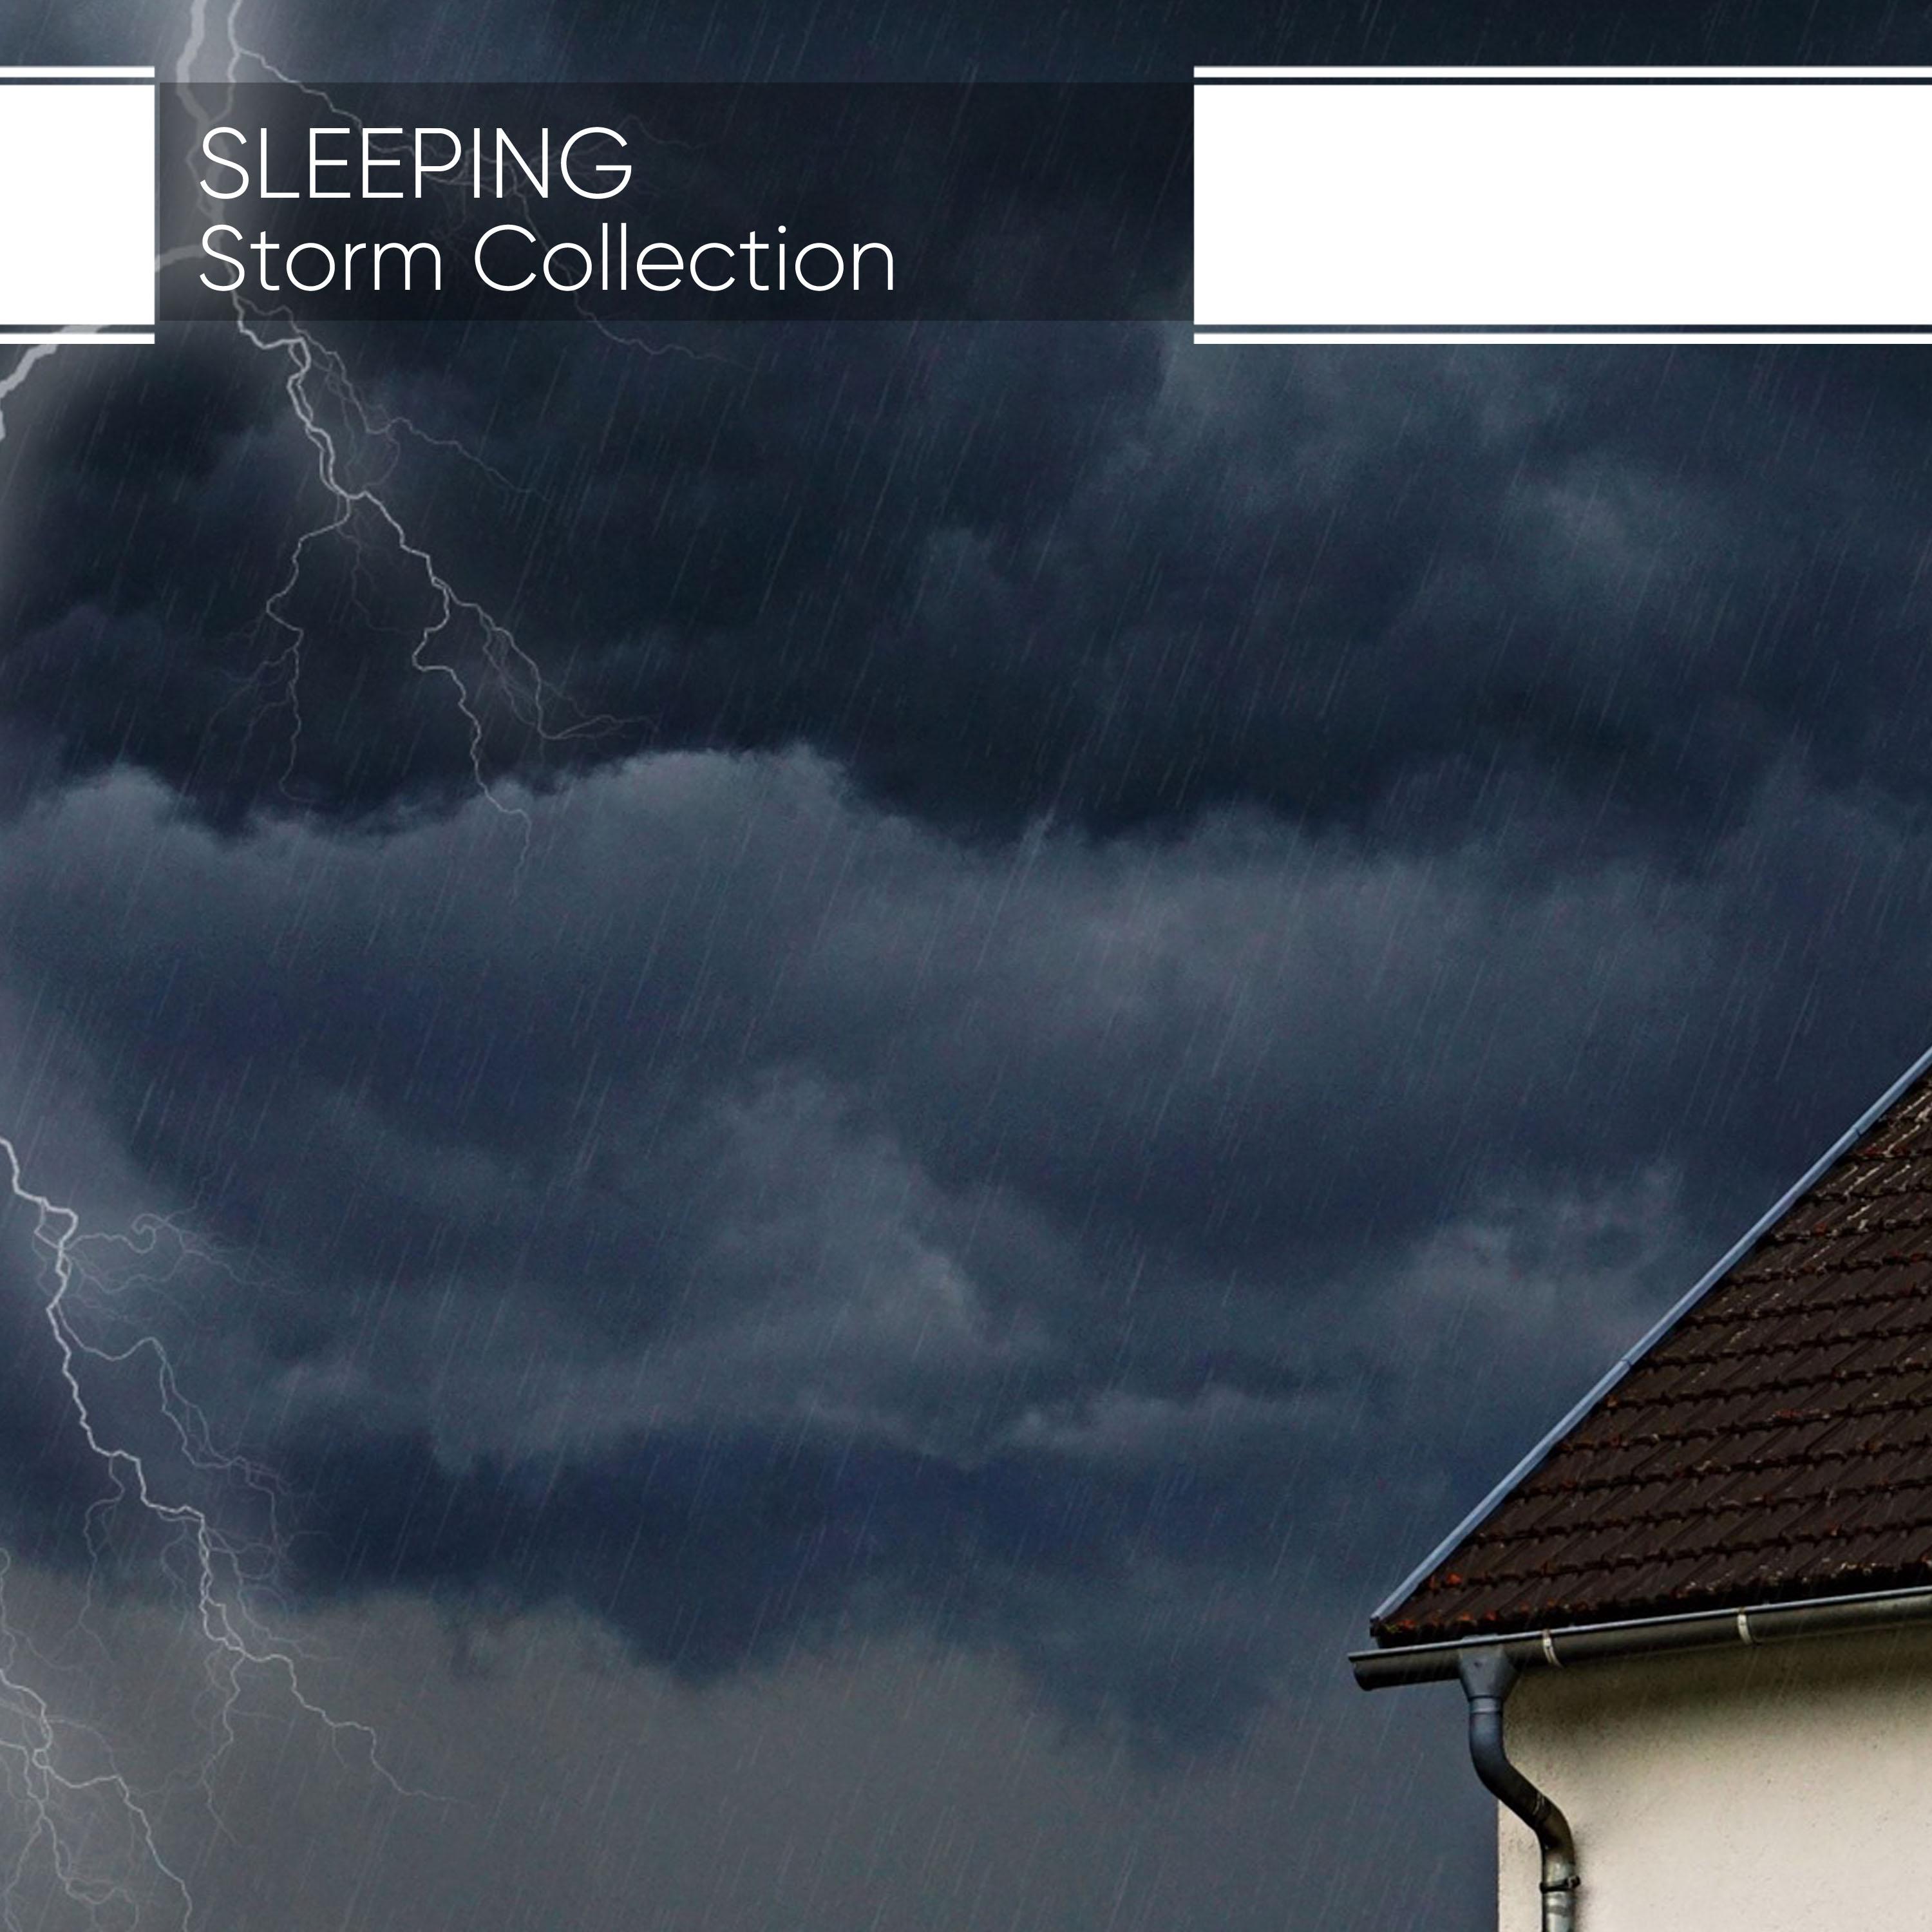 Sleeping Storm Collection